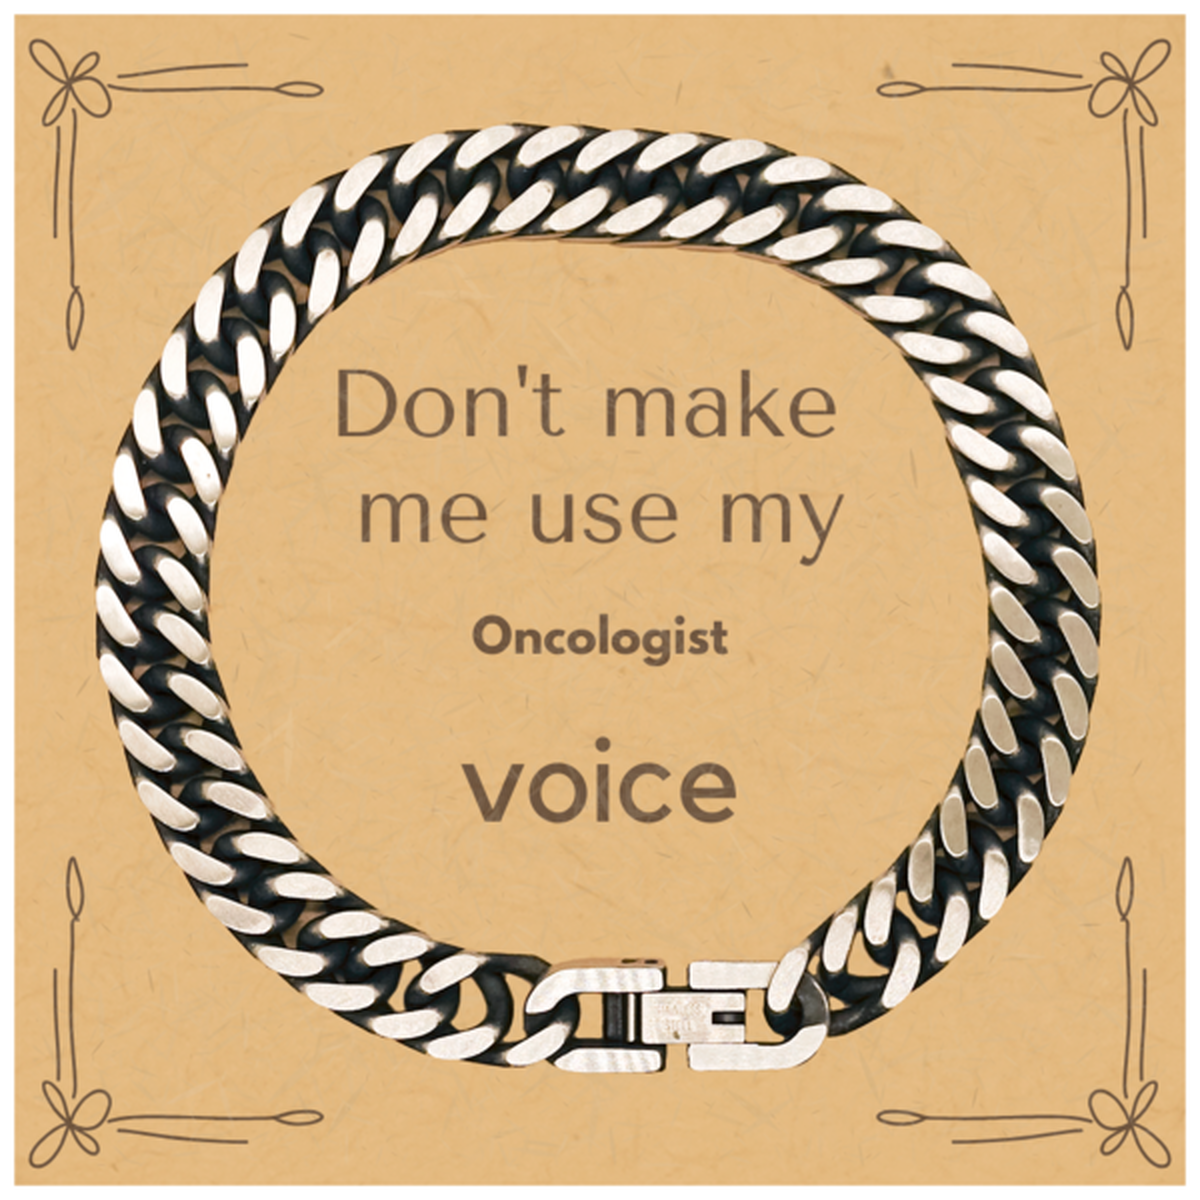 Don't make me use my Oncologist voice, Sarcasm Oncologist Card Gifts, Christmas Oncologist Cuban Link Chain Bracelet Birthday Unique Gifts For Oncologist Coworkers, Men, Women, Colleague, Friends